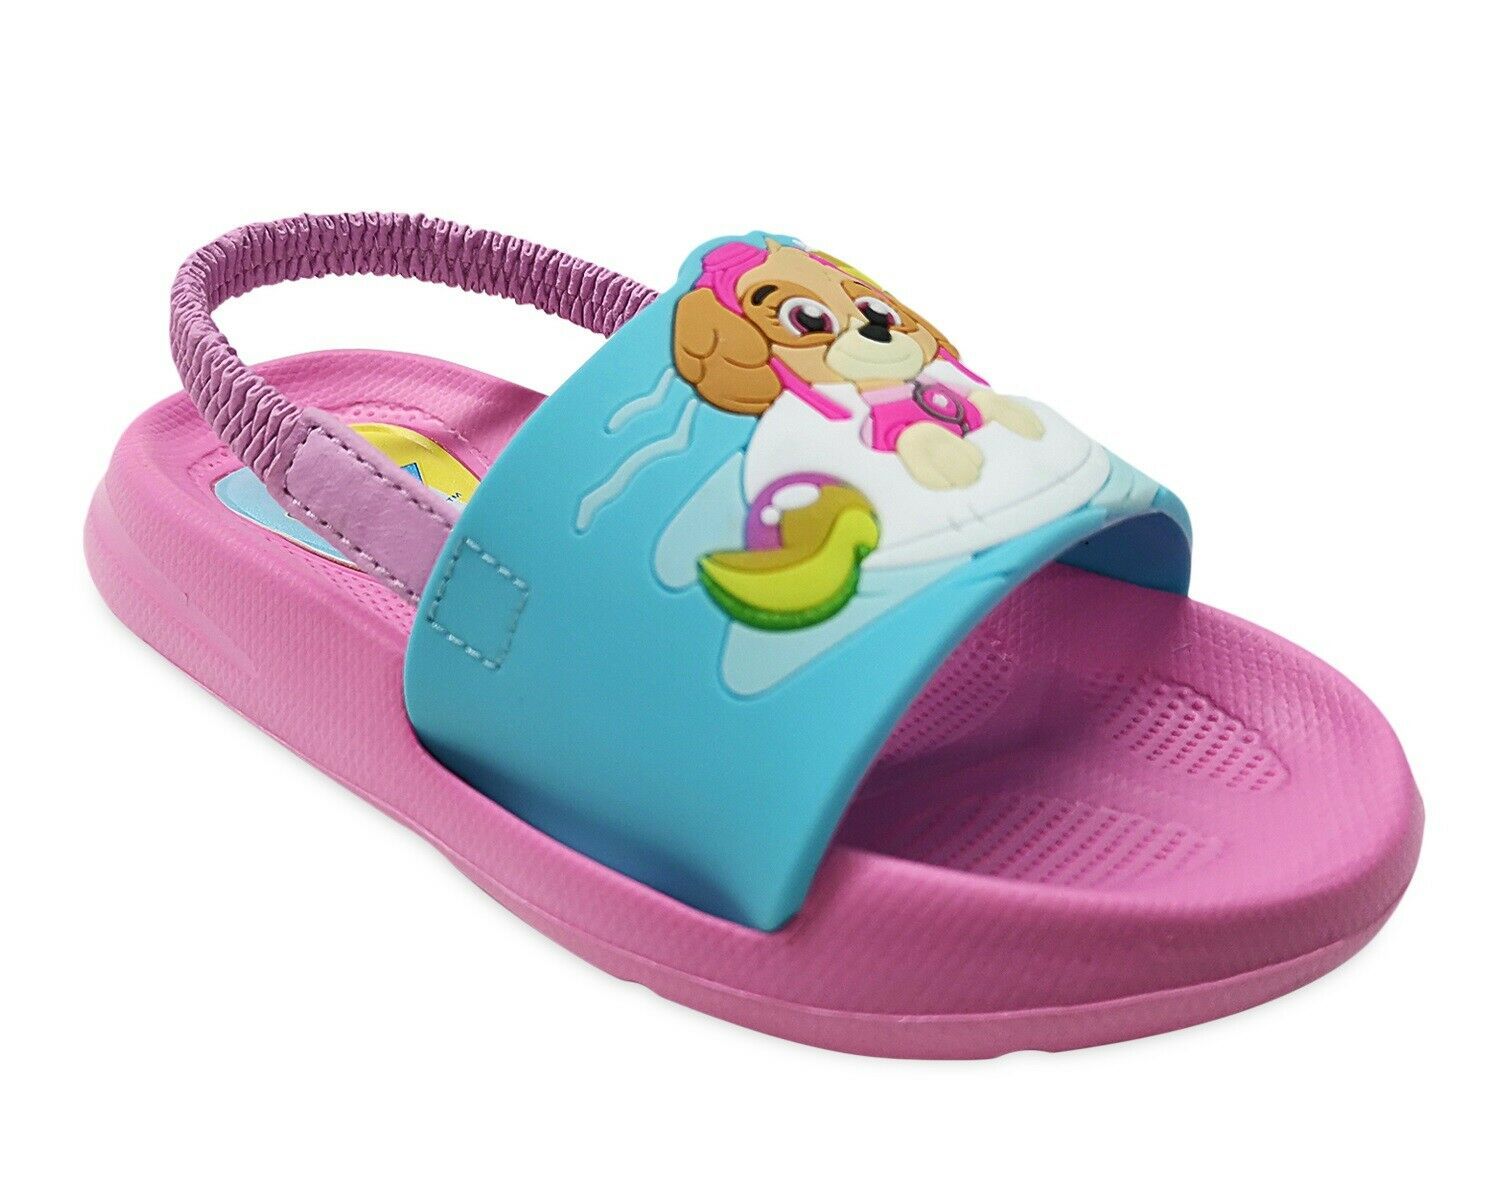 Primary image for Paw Patrol Sandals for Girls Size 5/6 or 11/12 Skye and Everest Foam